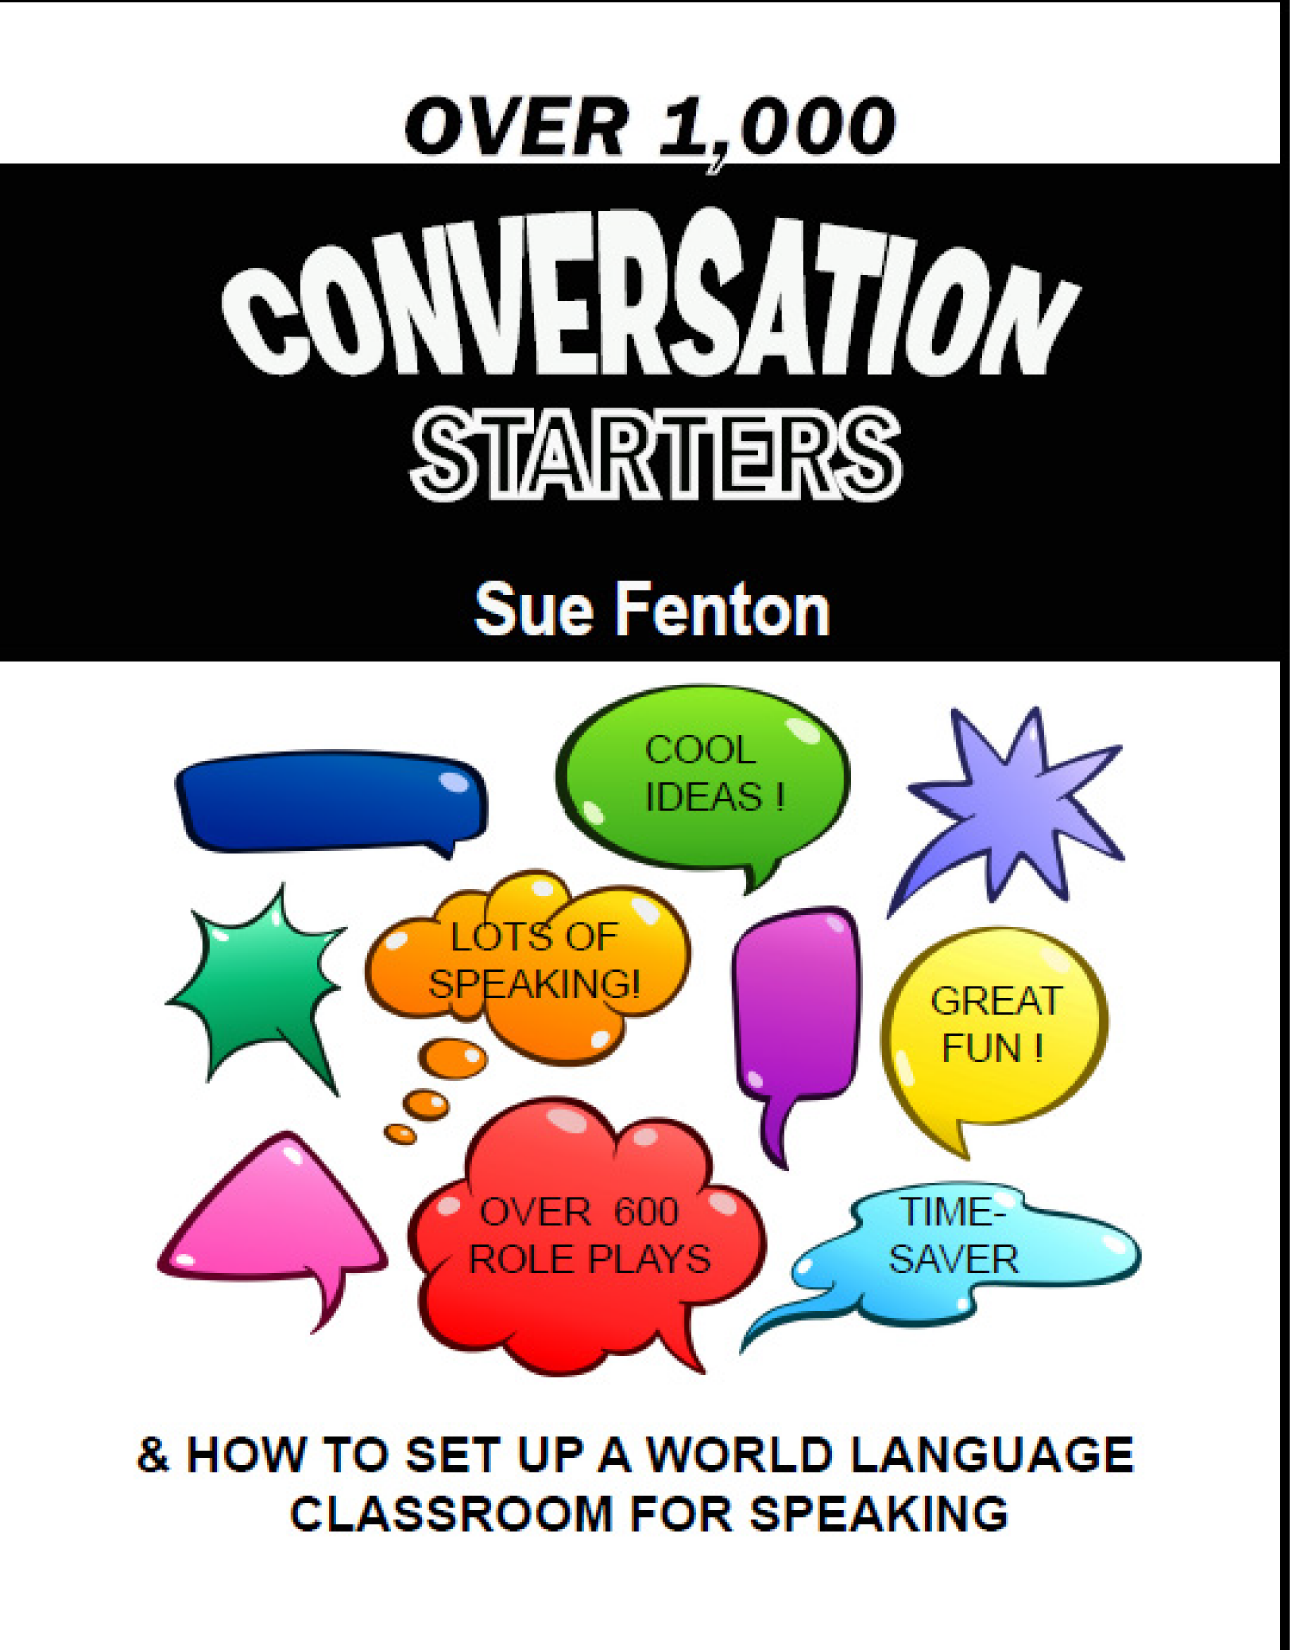 OVER 1,000 CONVERSATION STARTERS How to Set Up a Speaking Class